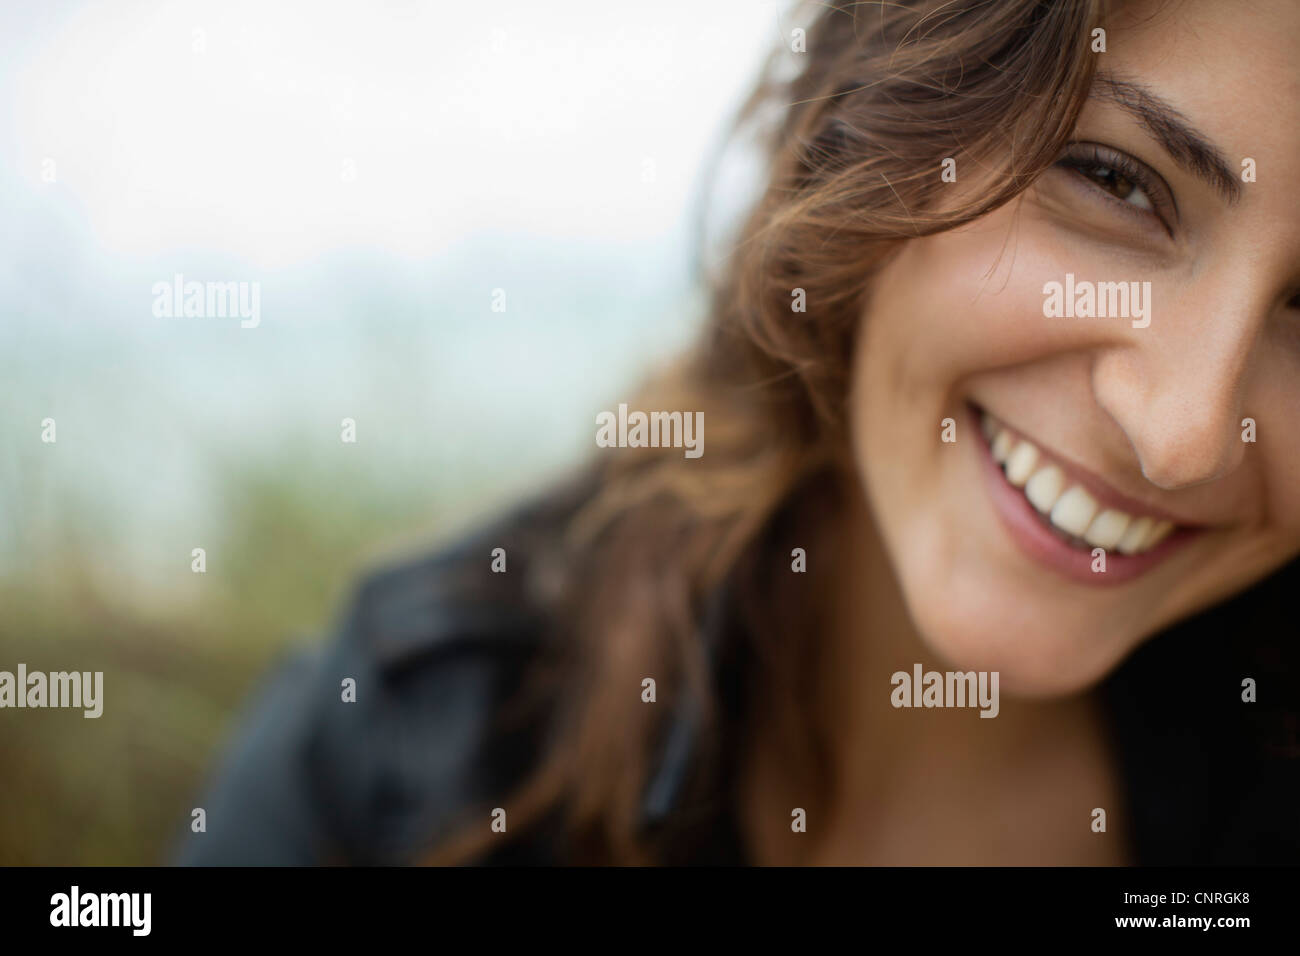 Smiling young woman, cropped Stock Photo